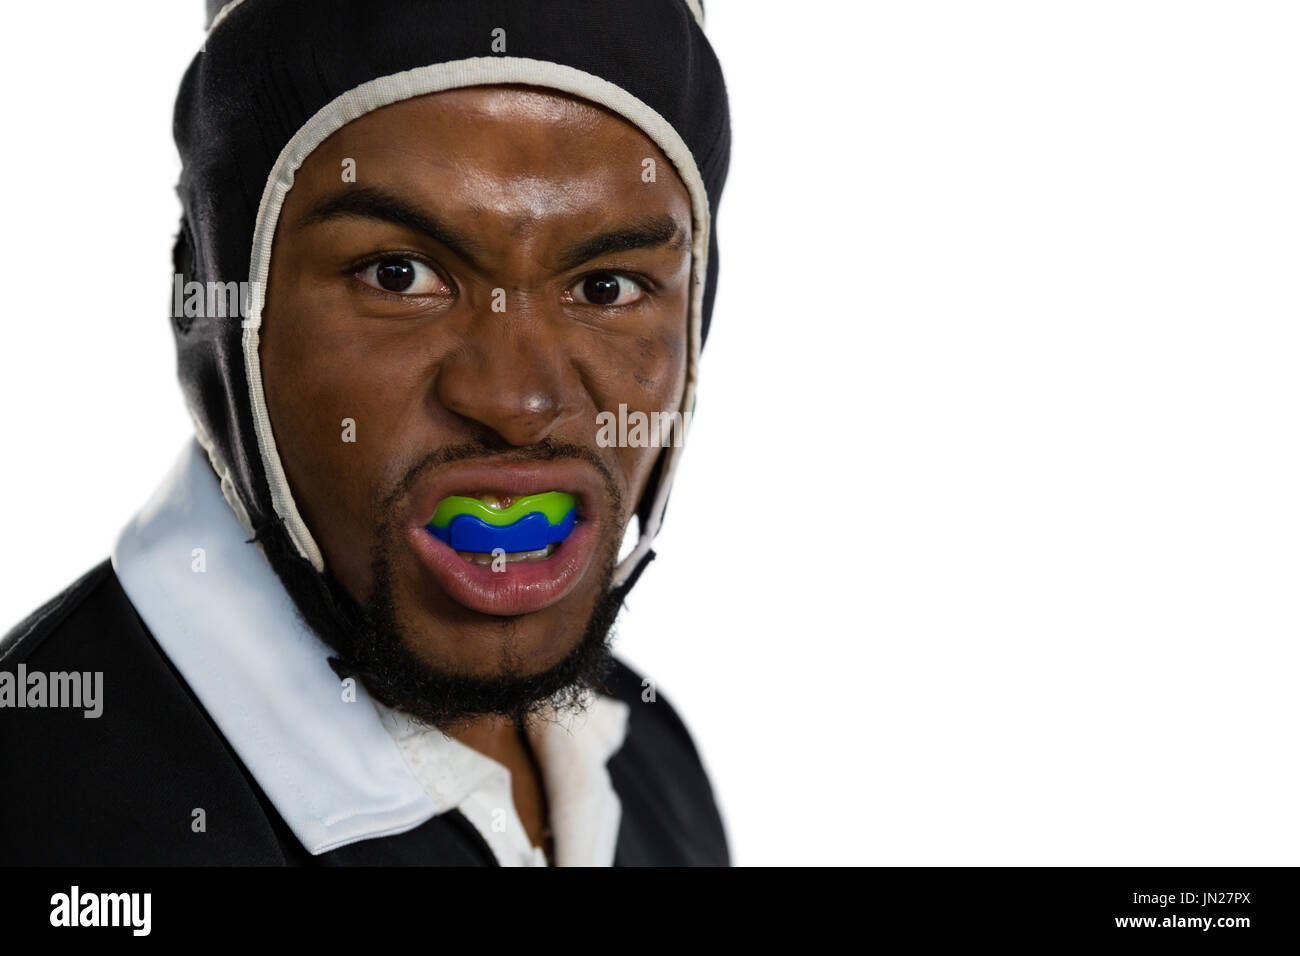 Portrait of male rugby player with mouthguard against white bakground Stock Photo